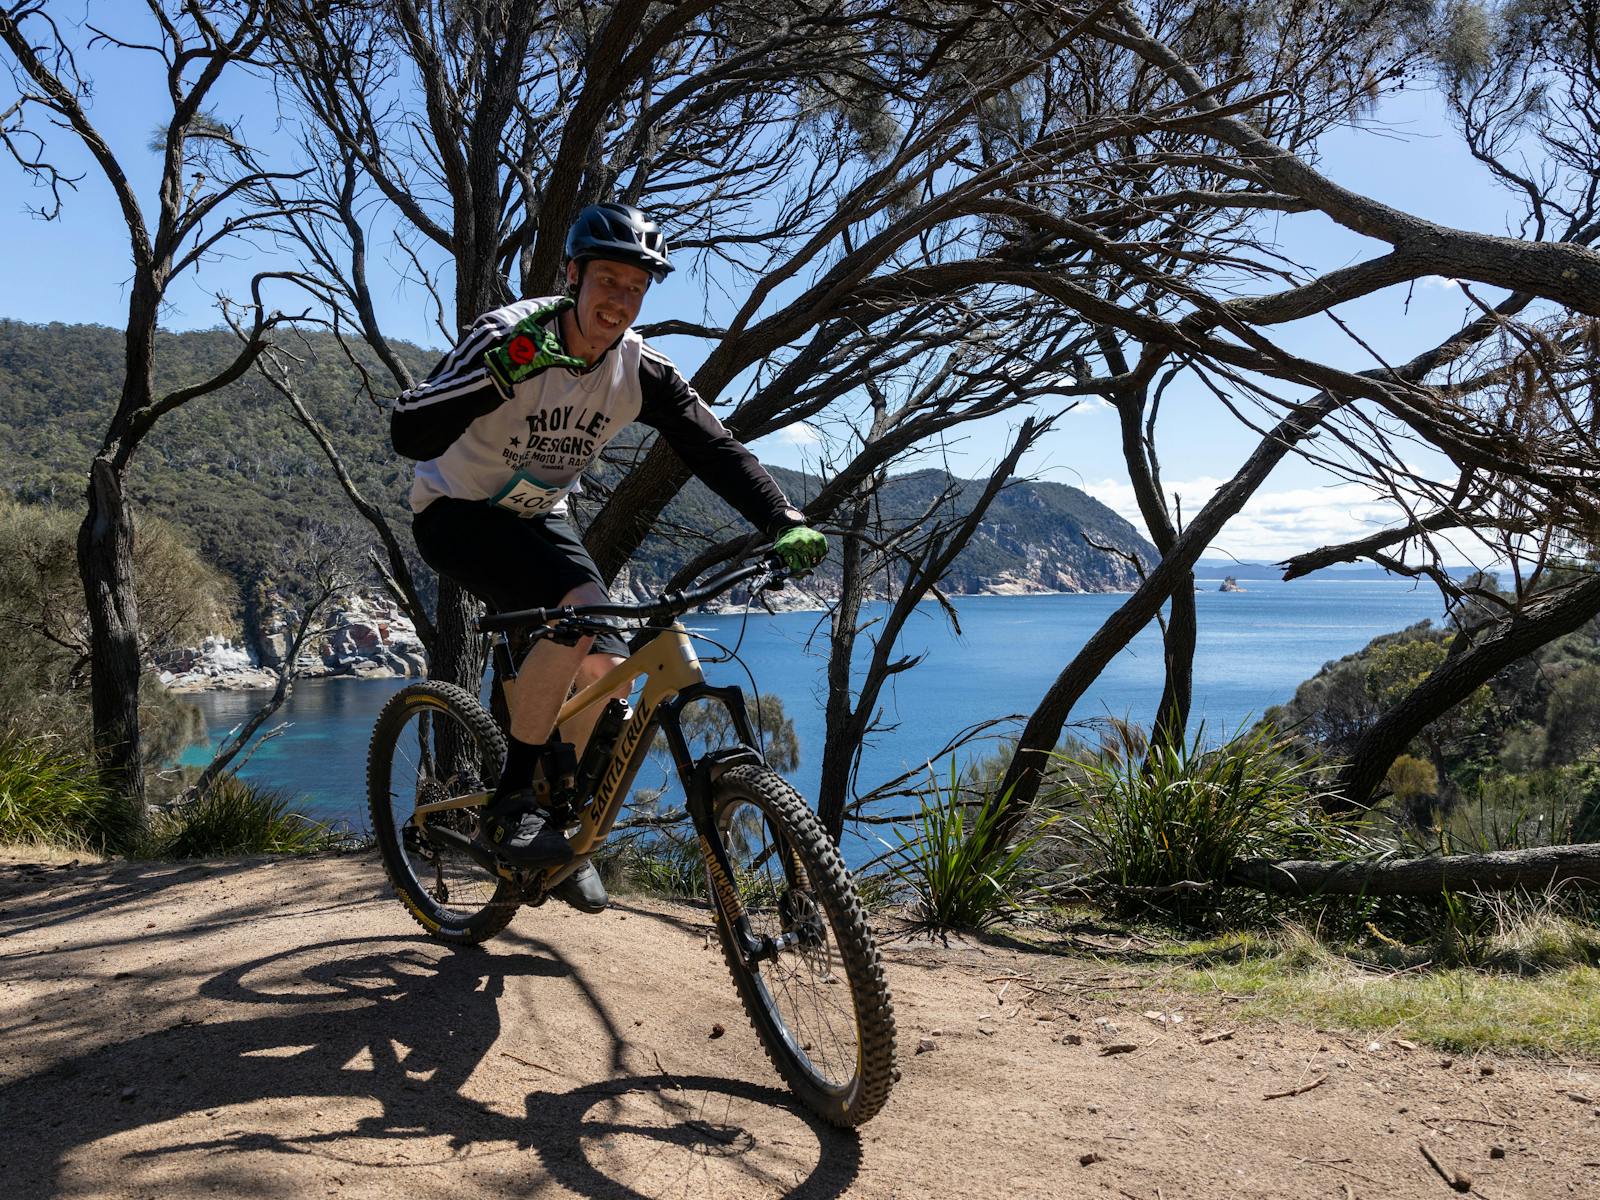 Riding in the Mountain Bike stage of the Freycinet Challenge at Coles Bay in Tasmania.